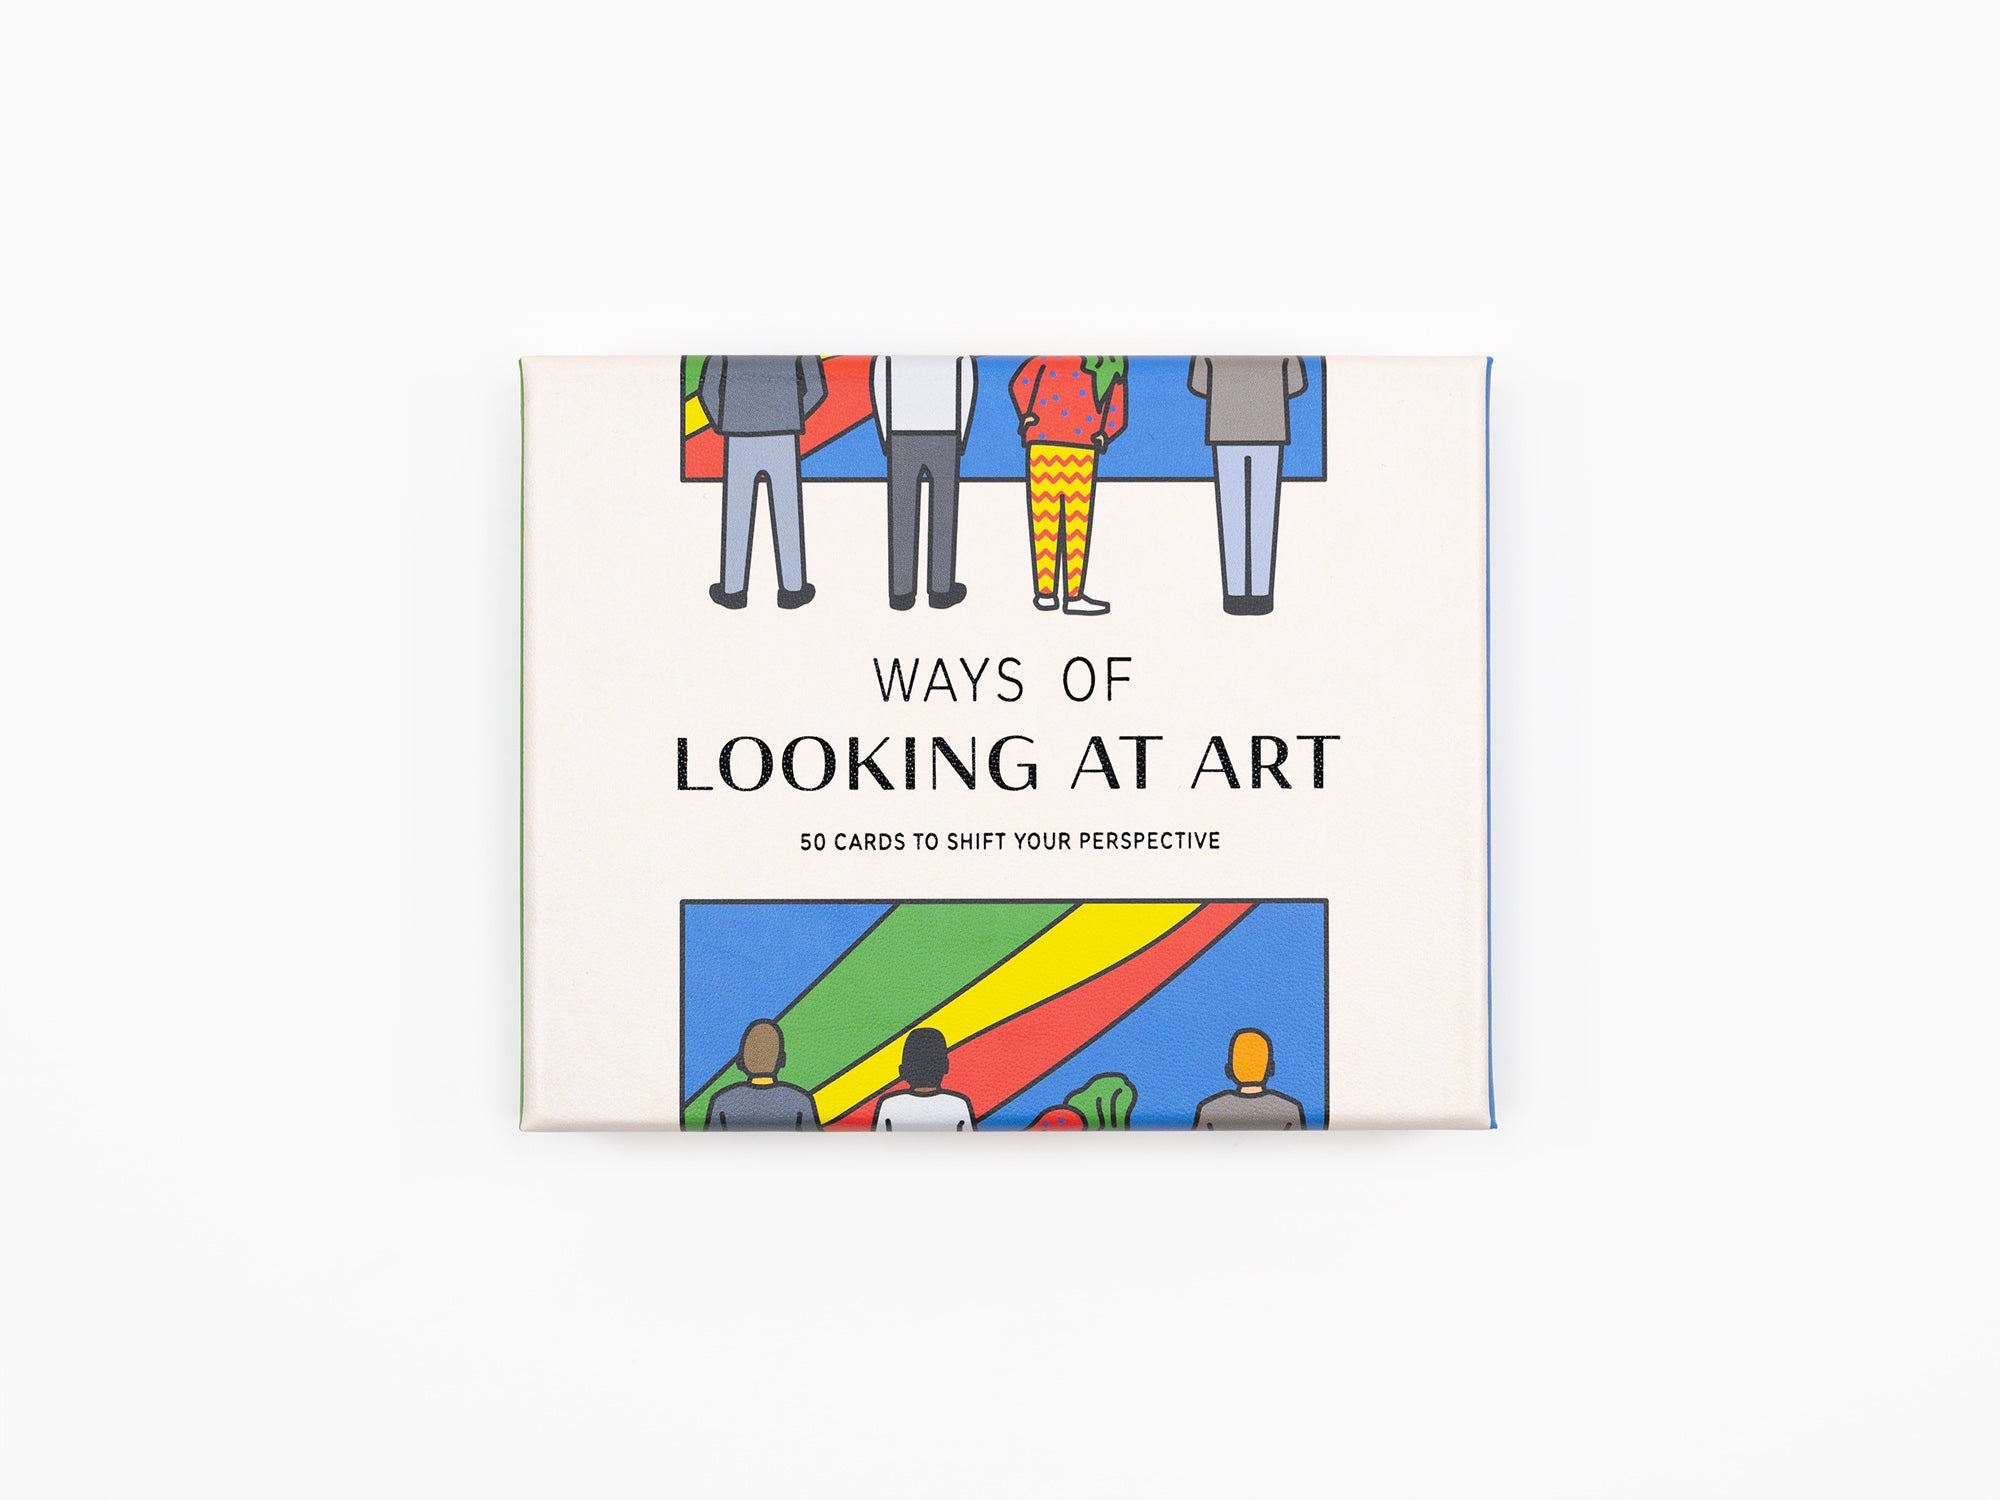 Ways of looking at art - 50 cards to shift your perspective